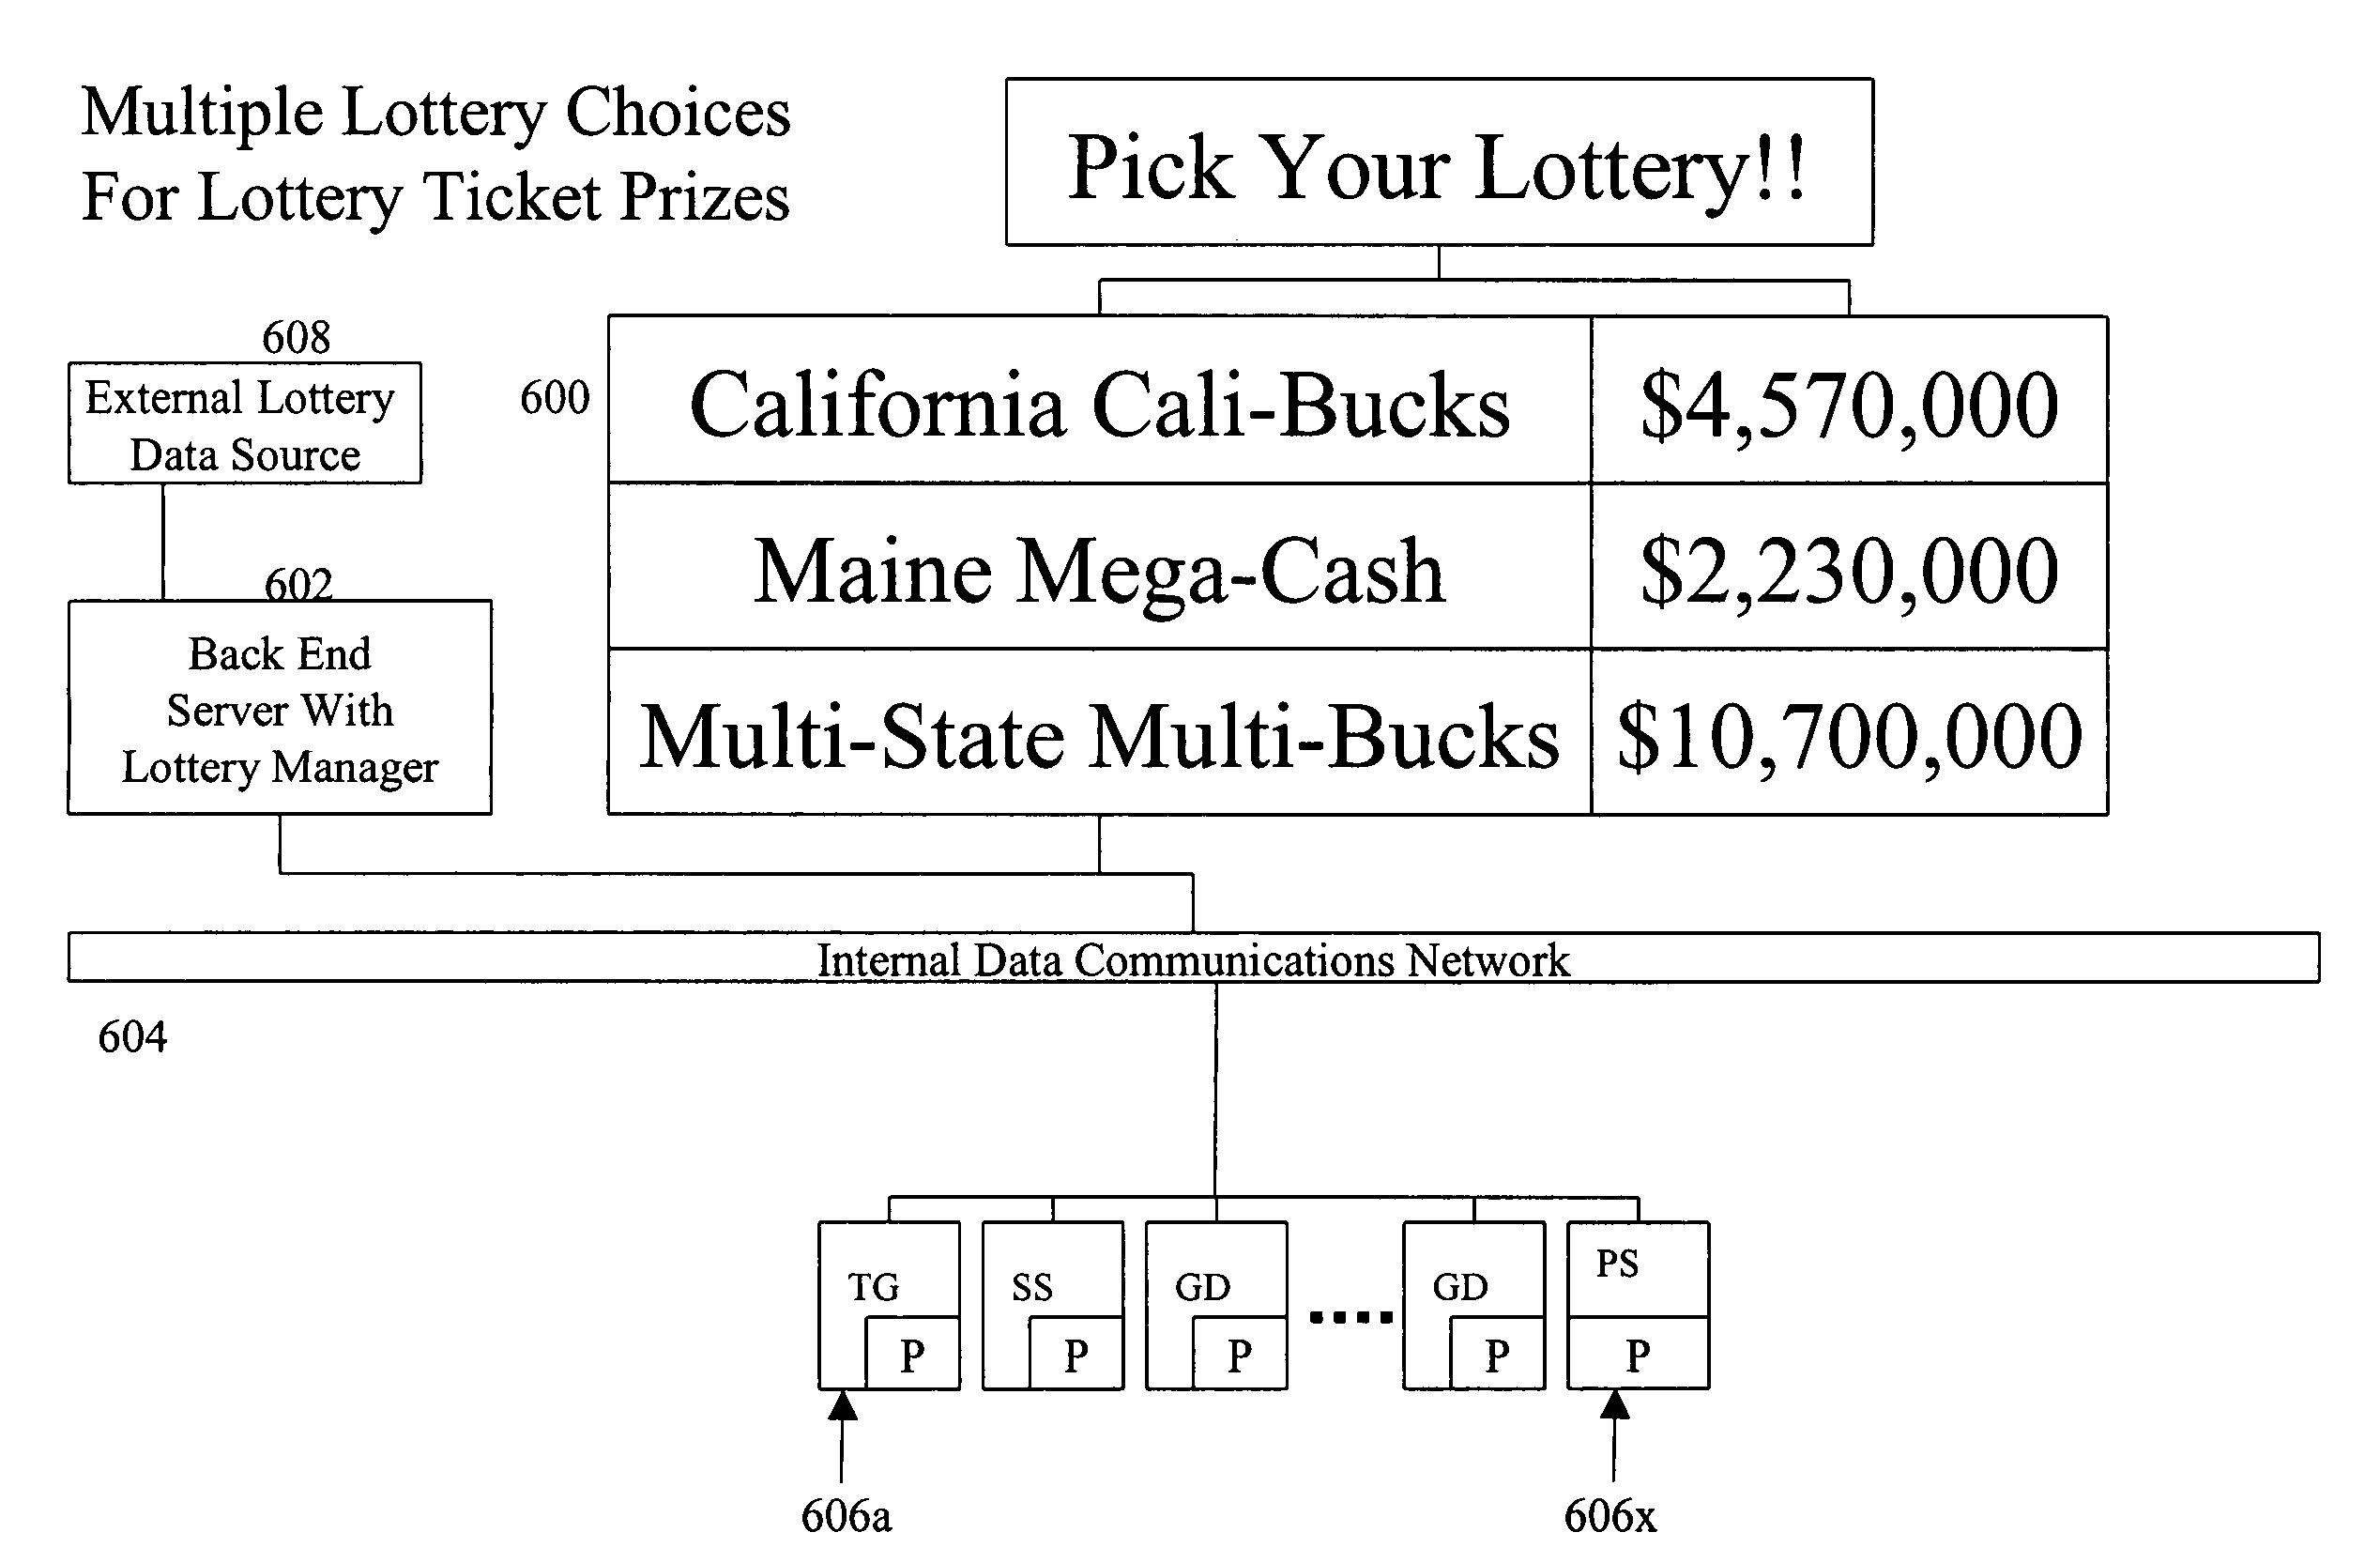 Lottery game tickets as prizes in games of chance